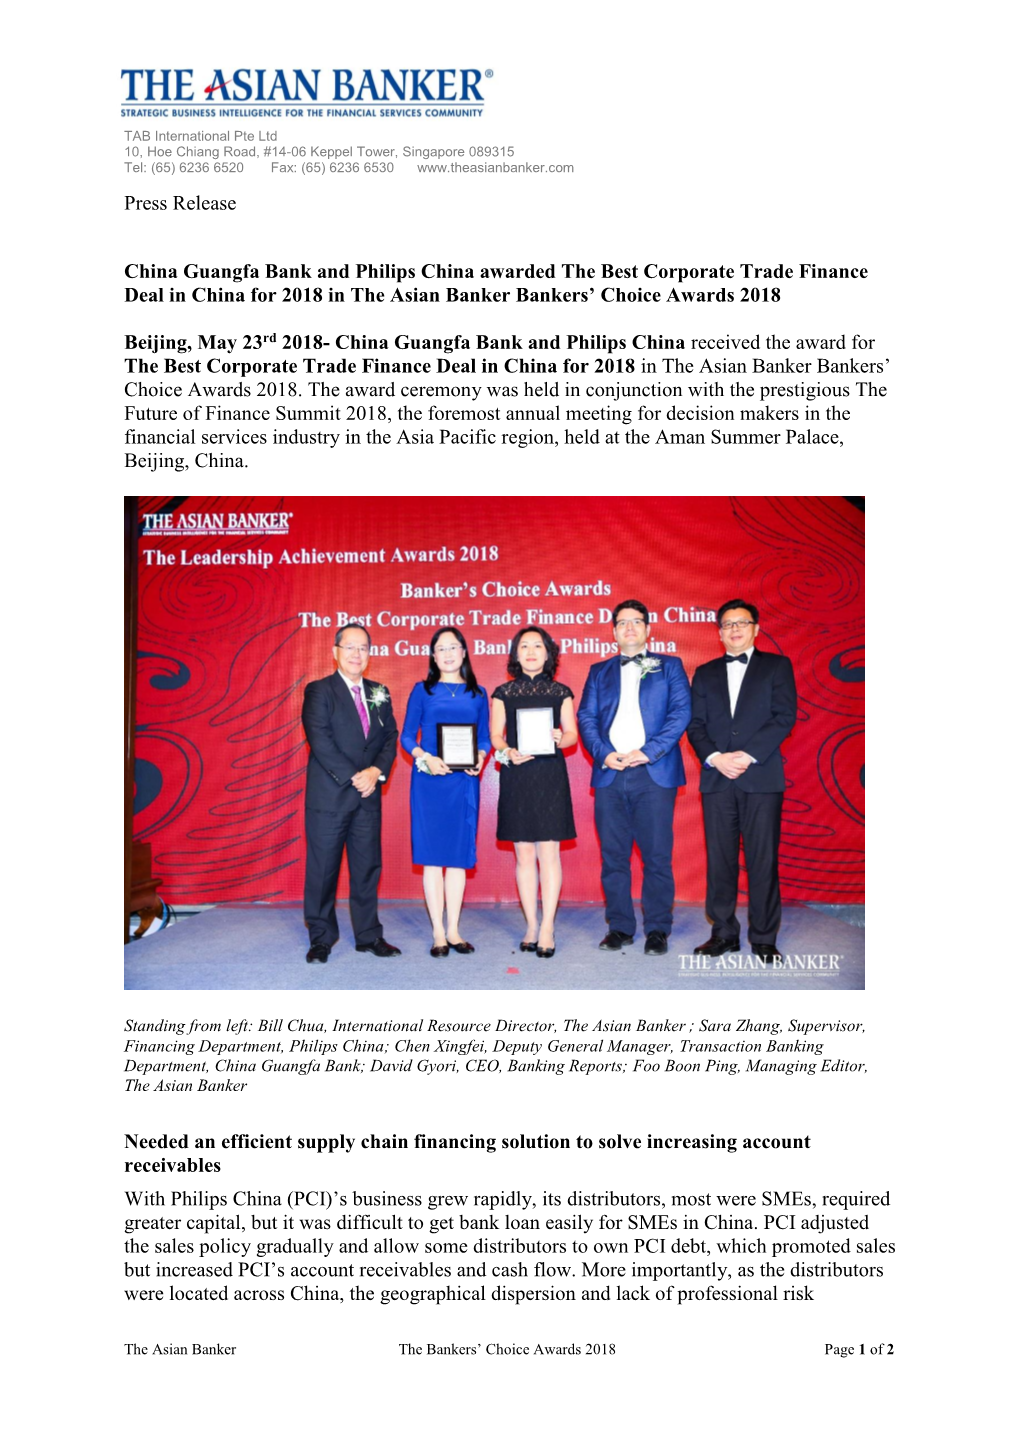 Press Release China Guangfa Bank and Philips China Awarded The